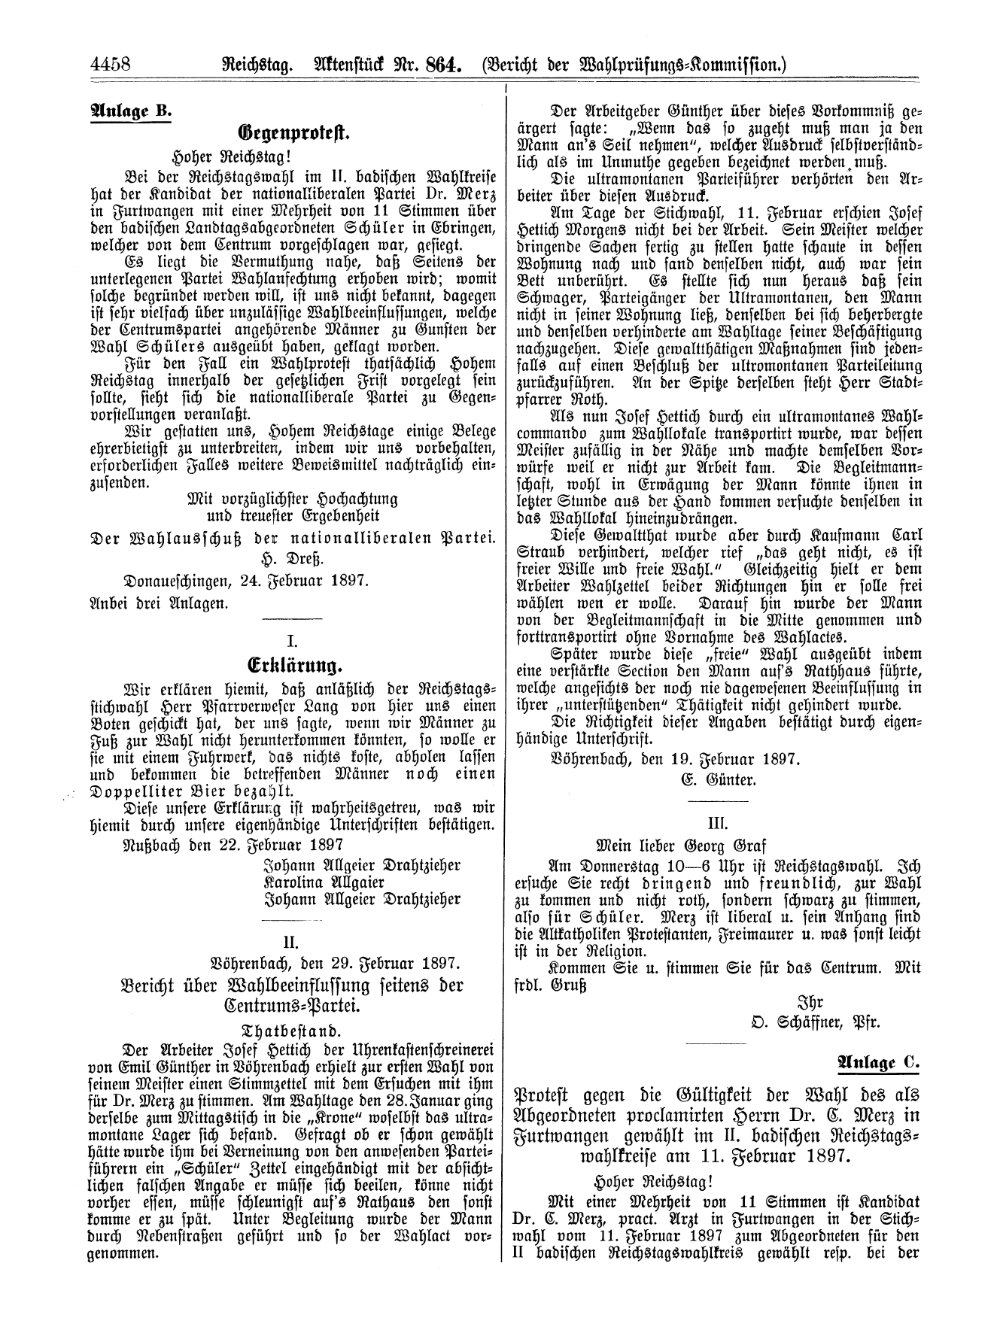 Scan of page 4458